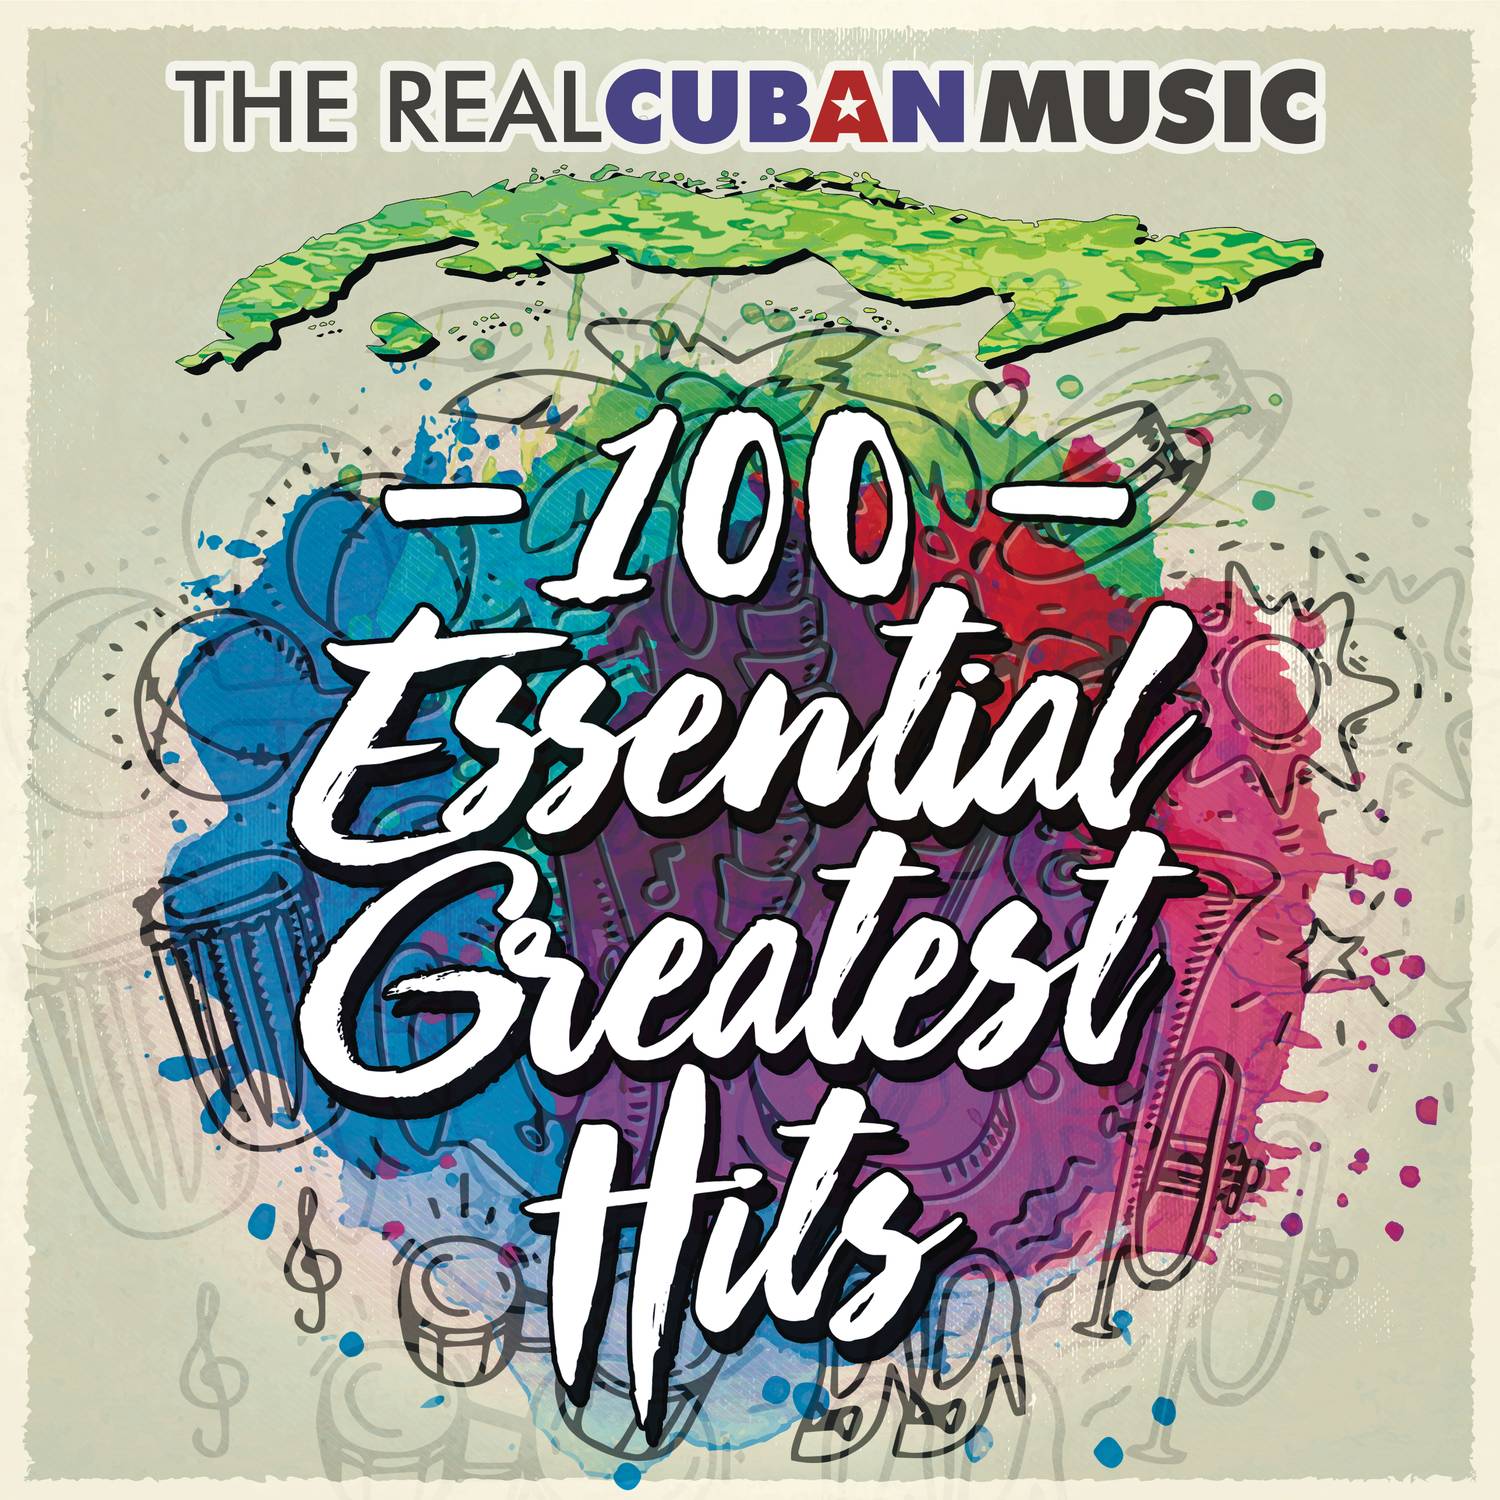 The Real Cuban Music - 100 Essential Greatest Hits (Remasterizado)